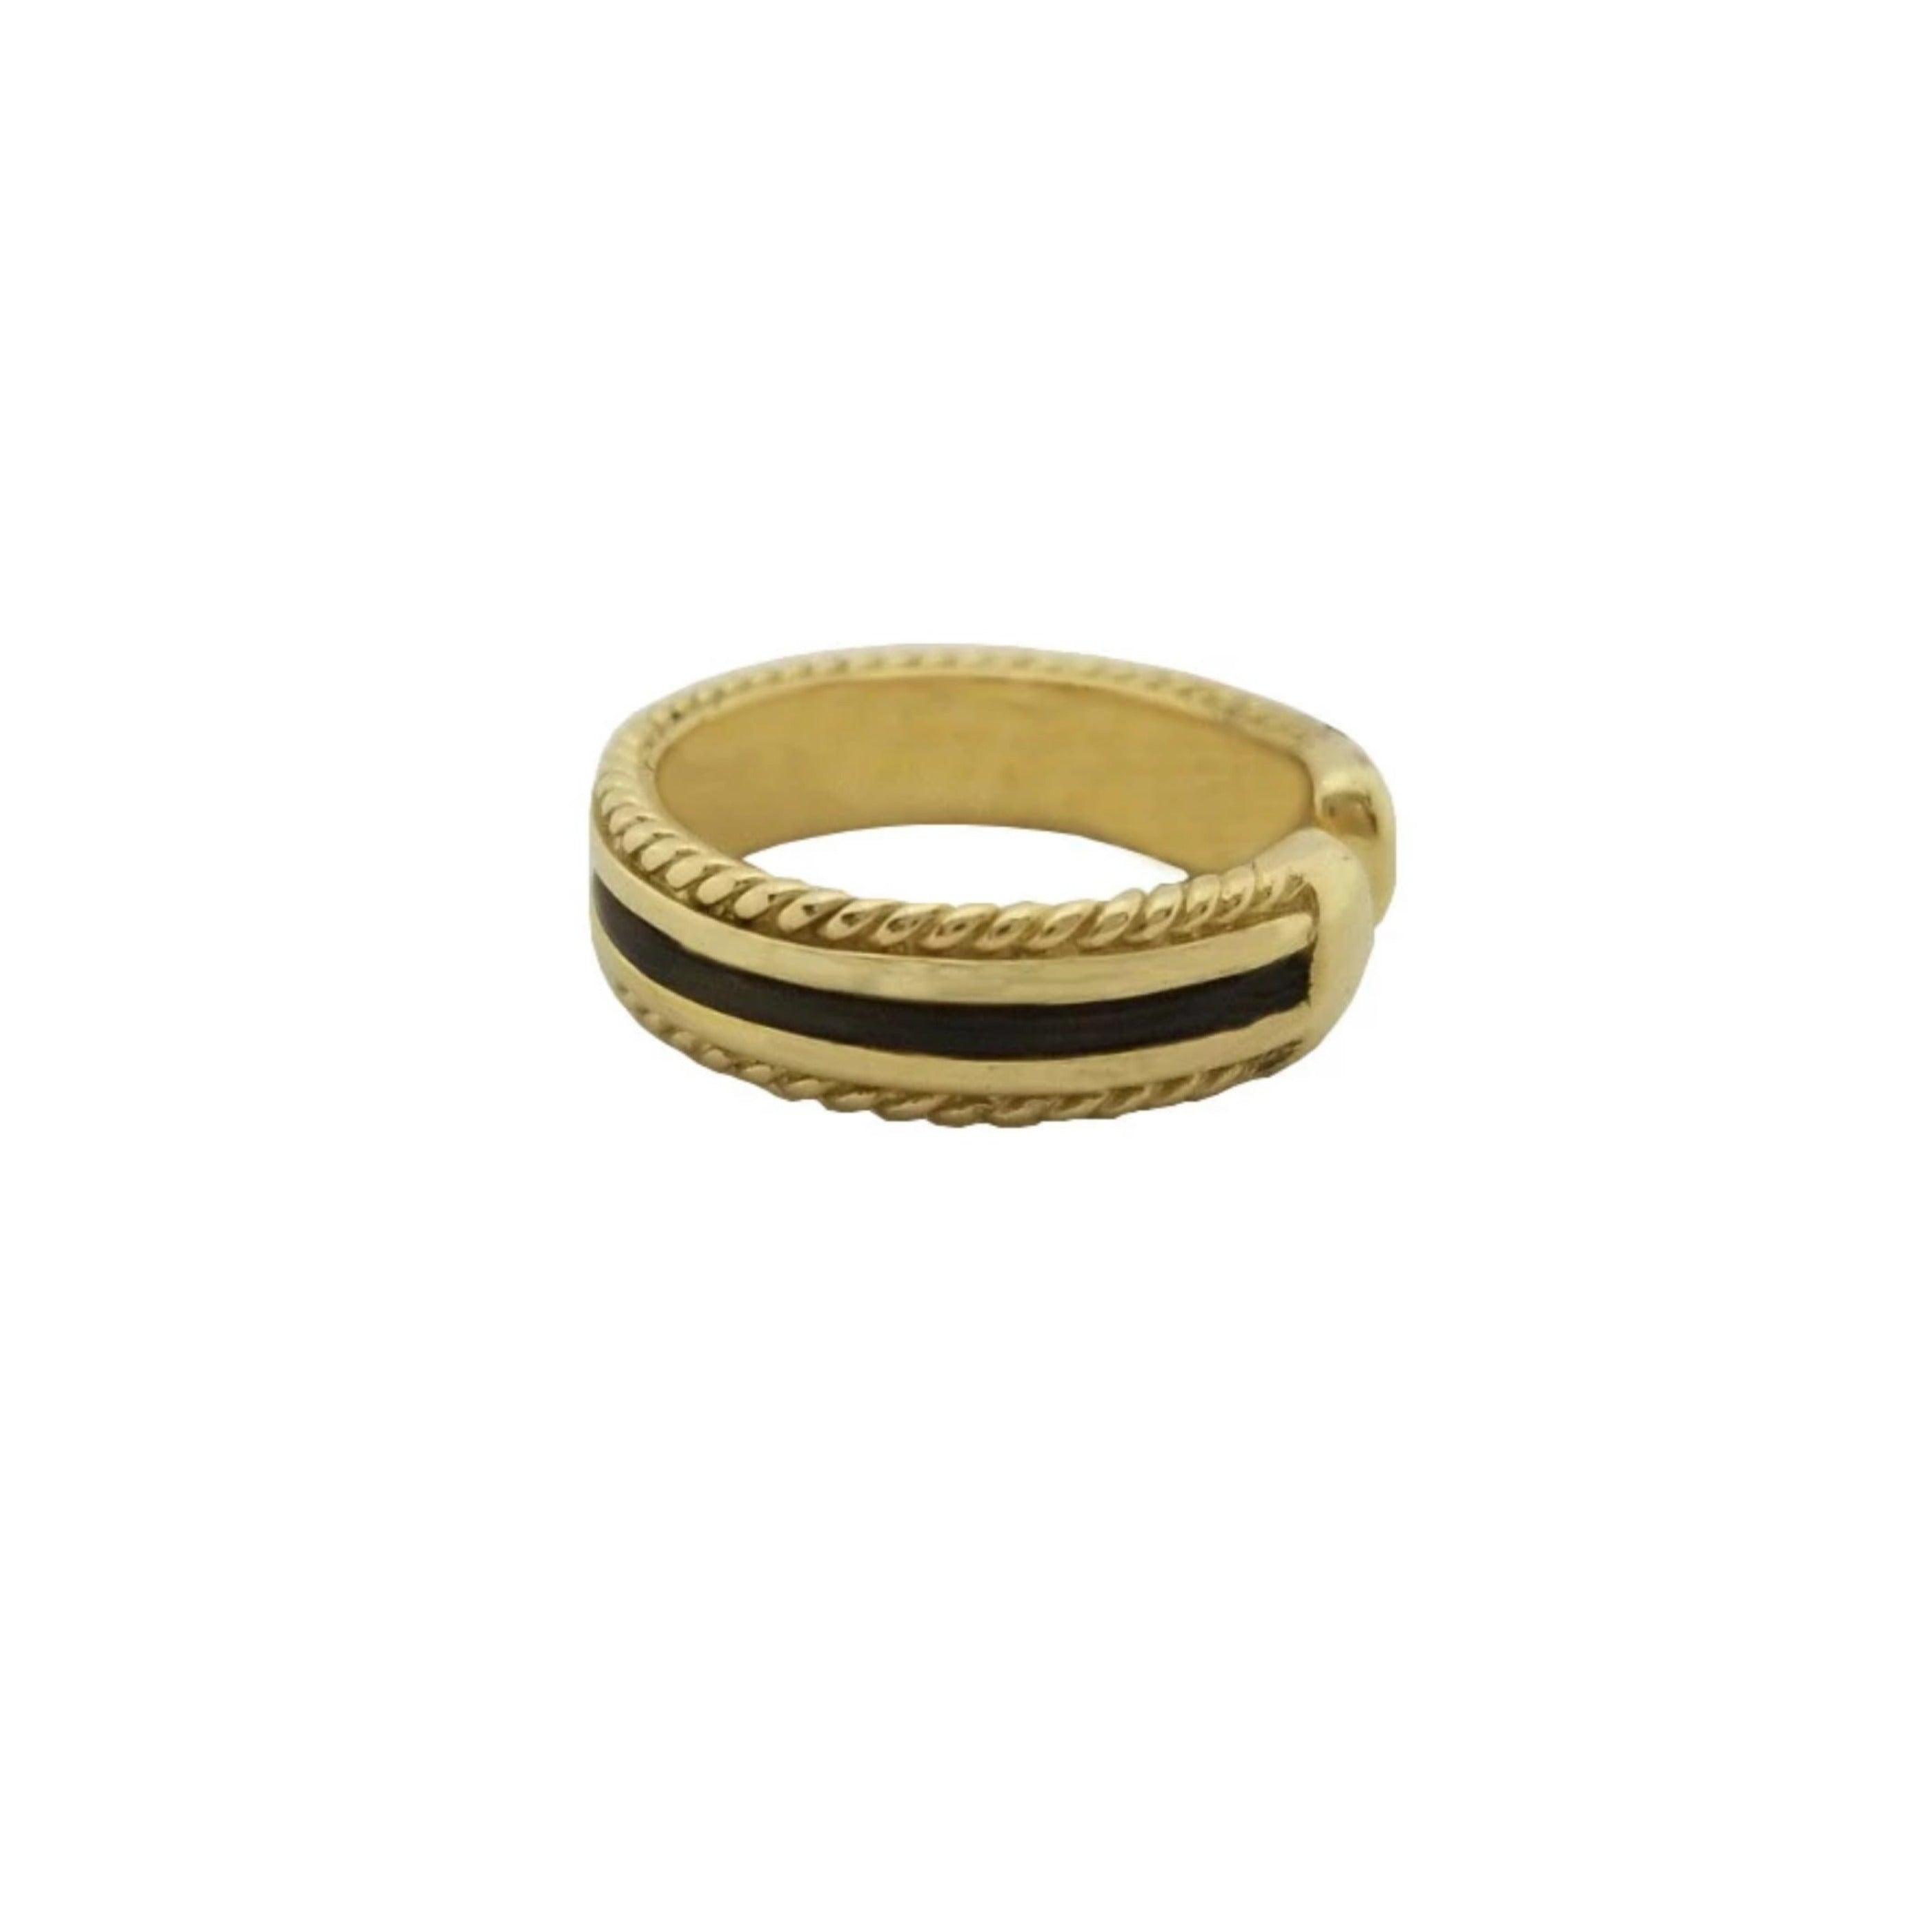 Gold Elephant Hair Ring with Twisted Edges